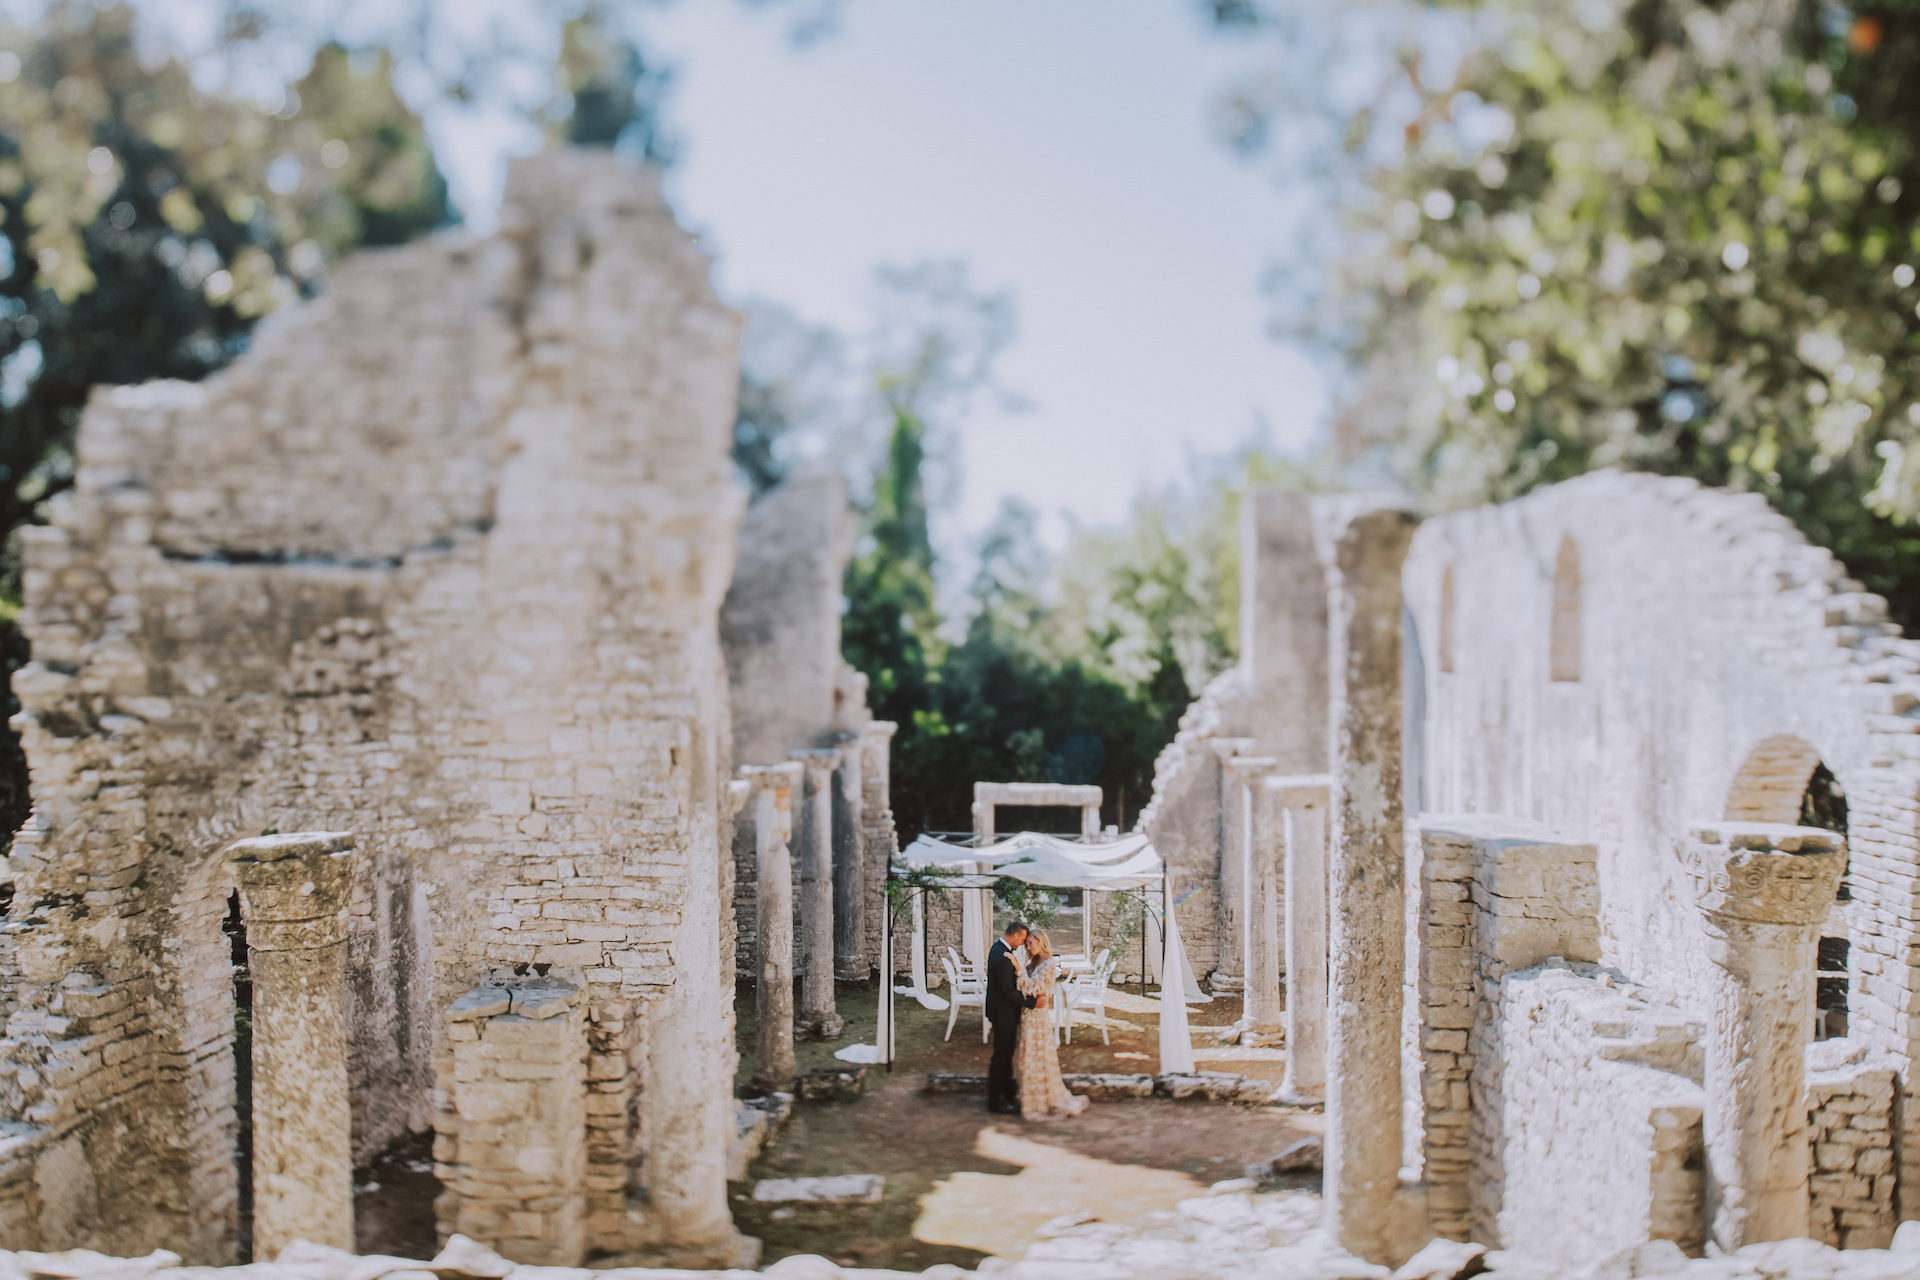 Ancient ruins in Istria, Croatia with a wedding couple